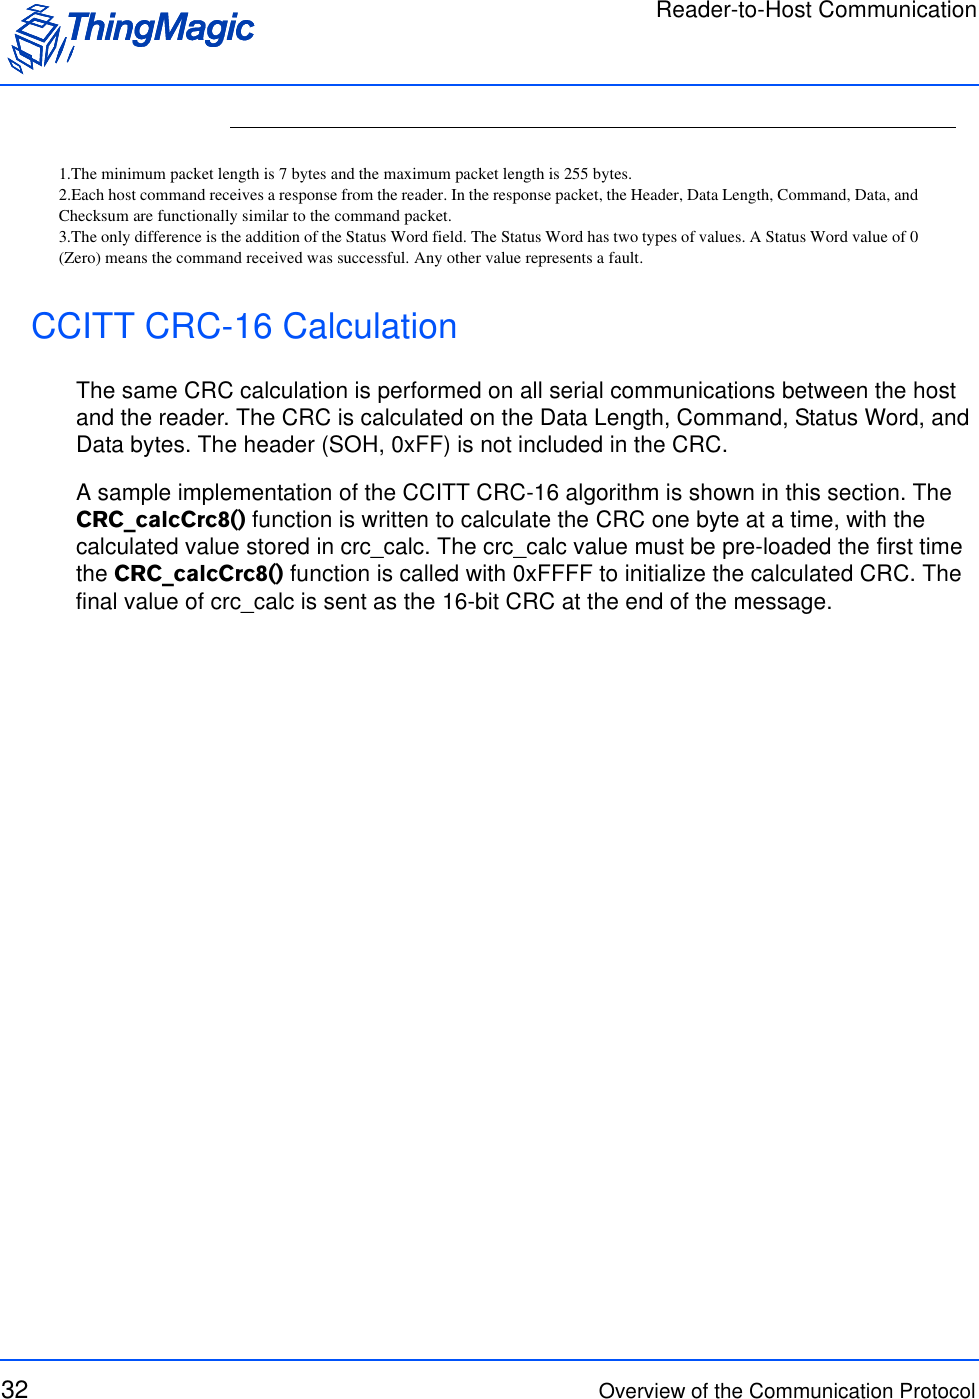 Reader-to-Host Communication32 Overview of the Communication ProtocolCCITT CRC-16 CalculationThe same CRC calculation is performed on all serial communications between the host and the reader. The CRC is calculated on the Data Length, Command, Status Word, and Data bytes. The header (SOH, 0xFF) is not included in the CRC.A sample implementation of the CCITT CRC-16 algorithm is shown in this section. The CRC_calcCrc8() function is written to calculate the CRC one byte at a time, with the calculated value stored in crc_calc. The crc_calc value must be pre-loaded the first time the CRC_calcCrc8() function is called with 0xFFFF to initialize the calculated CRC. The final value of crc_calc is sent as the 16-bit CRC at the end of the message. 1.The minimum packet length is 7 bytes and the maximum packet length is 255 bytes.2.Each host command receives a response from the reader. In the response packet, the Header, Data Length, Command, Data, andChecksum are functionally similar to the command packet.3.The only difference is the addition of the Status Word field. The Status Word has two types of values. A Status Word value of 0(Zero) means the command received was successful. Any other value represents a fault.